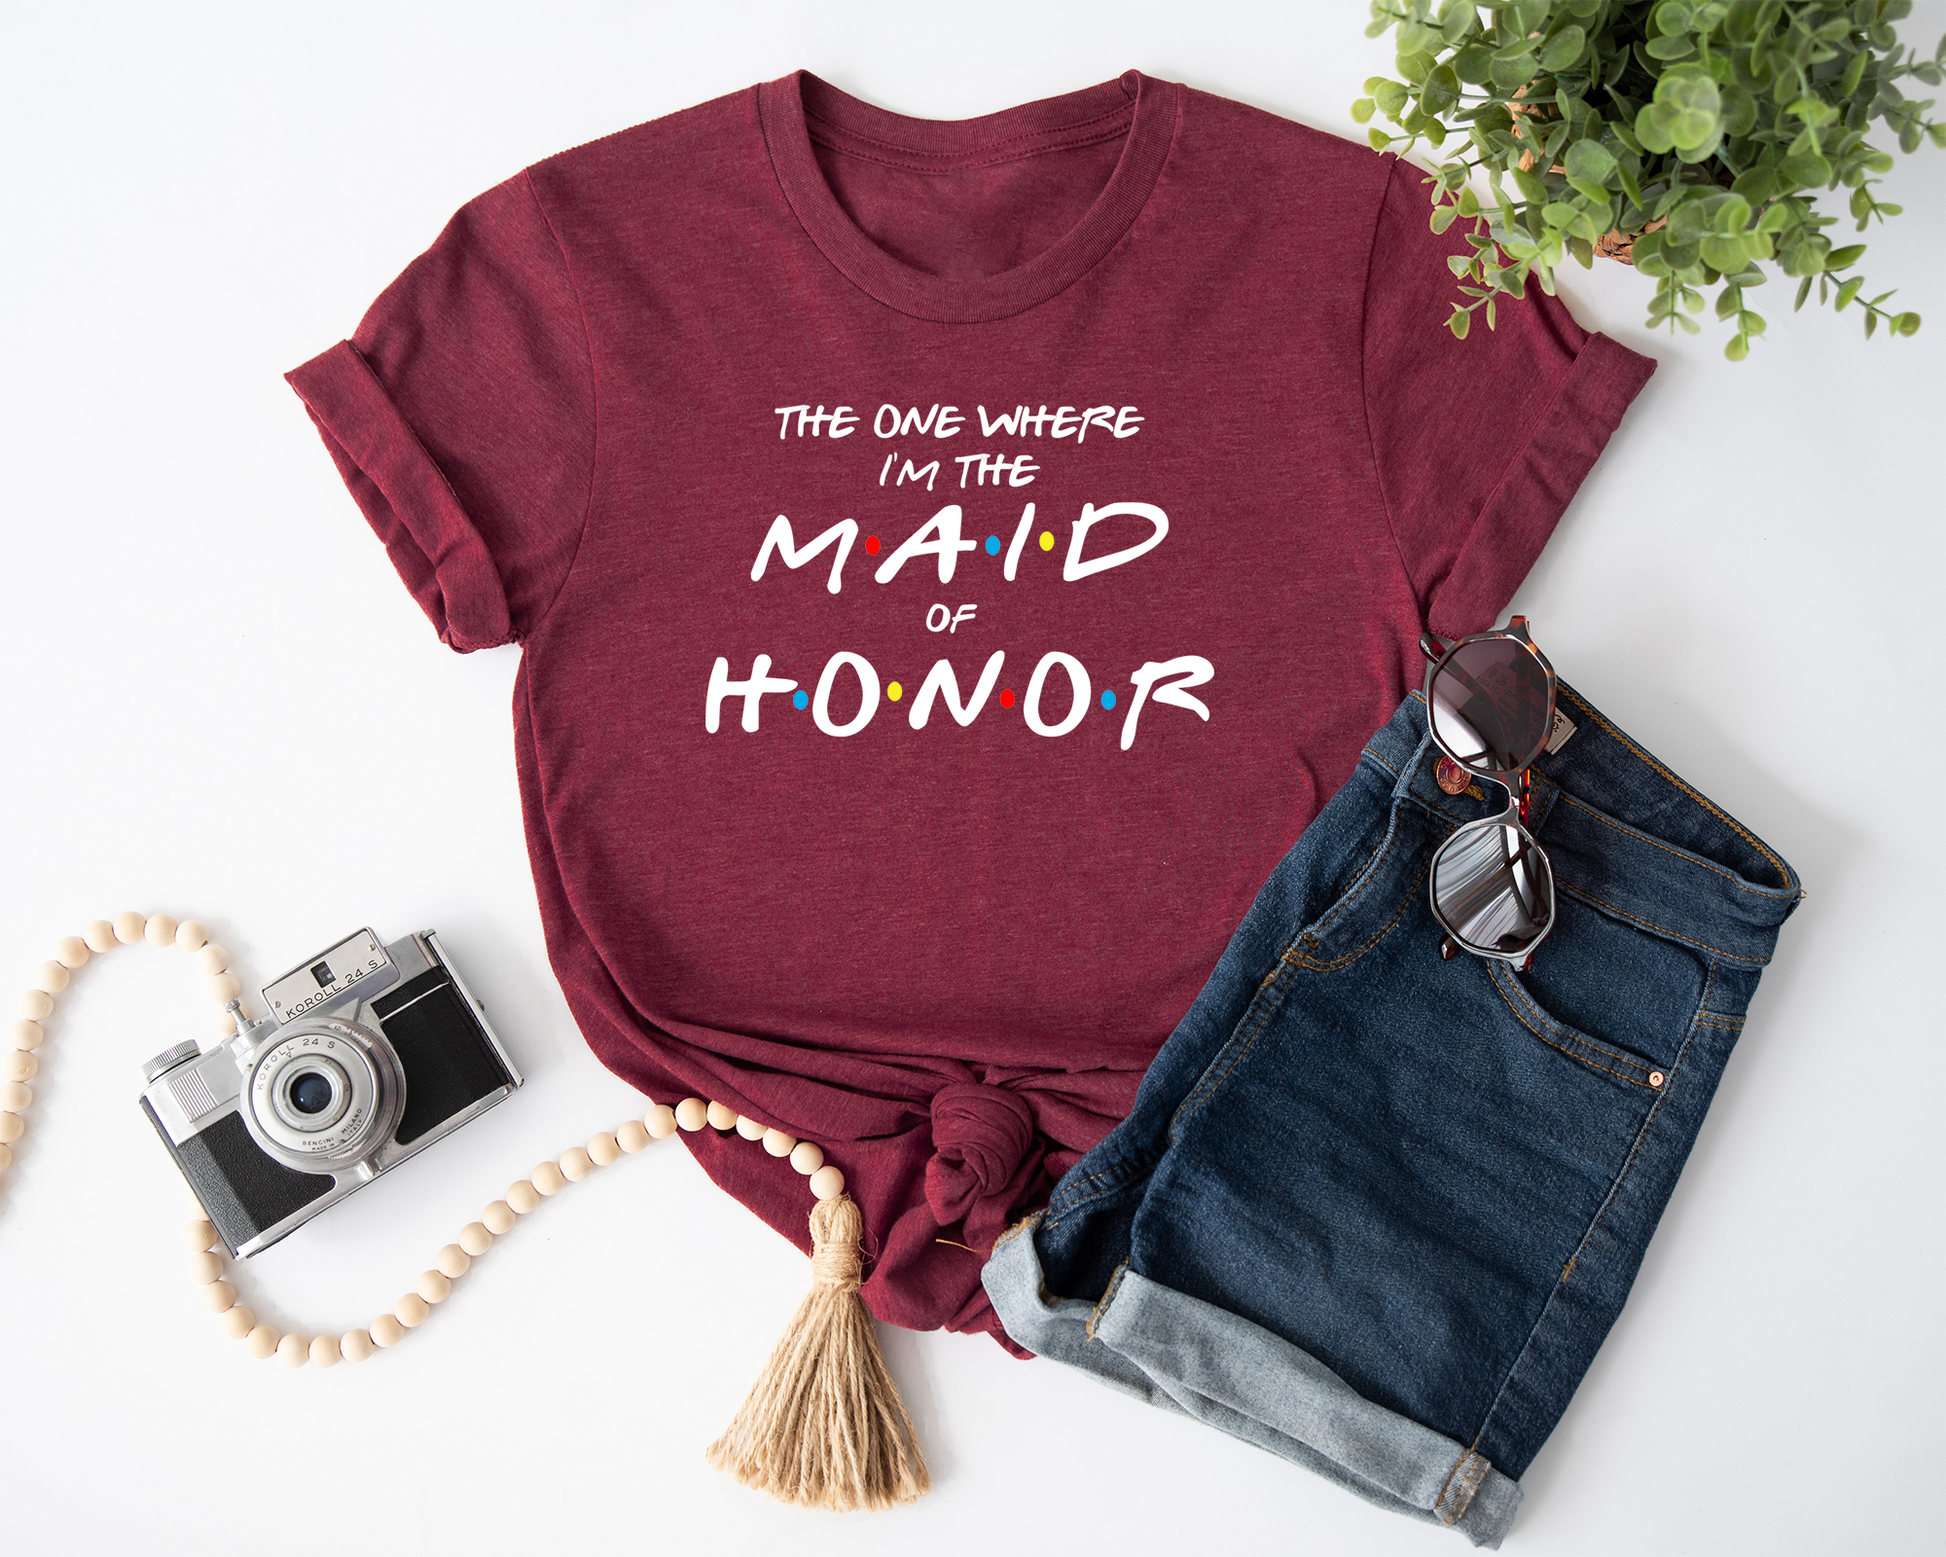 0434e6cf-648f-4c56-a2ff-f282ad0b87ce/maid_of_honor_white-MaroonL-F.png